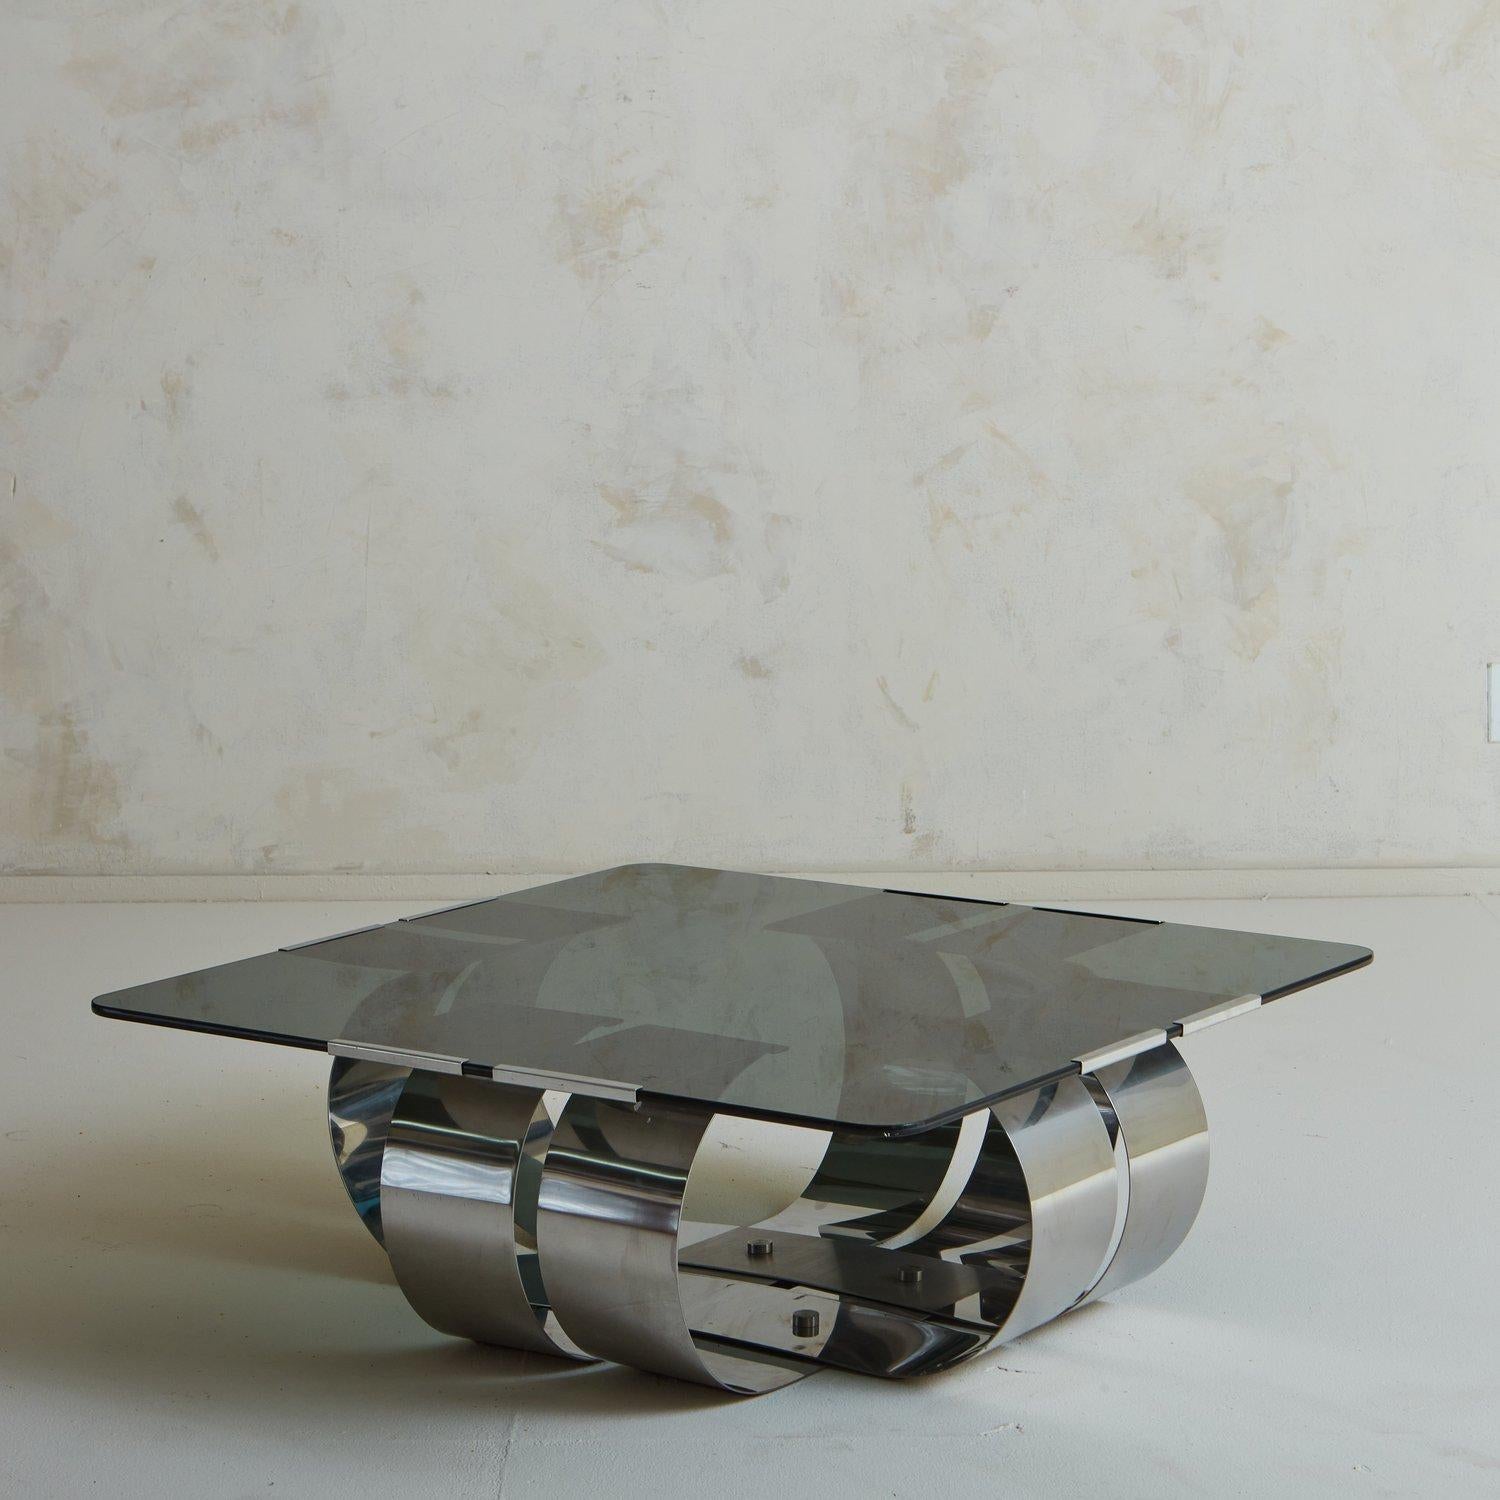 A captivating French coffee table designed by François Monnet in the 1970s. This table has a sculptural curved steel base and an inset square smoked glass tabletop with rounded edges. Unsigned. Sourced in France, 1970s.

